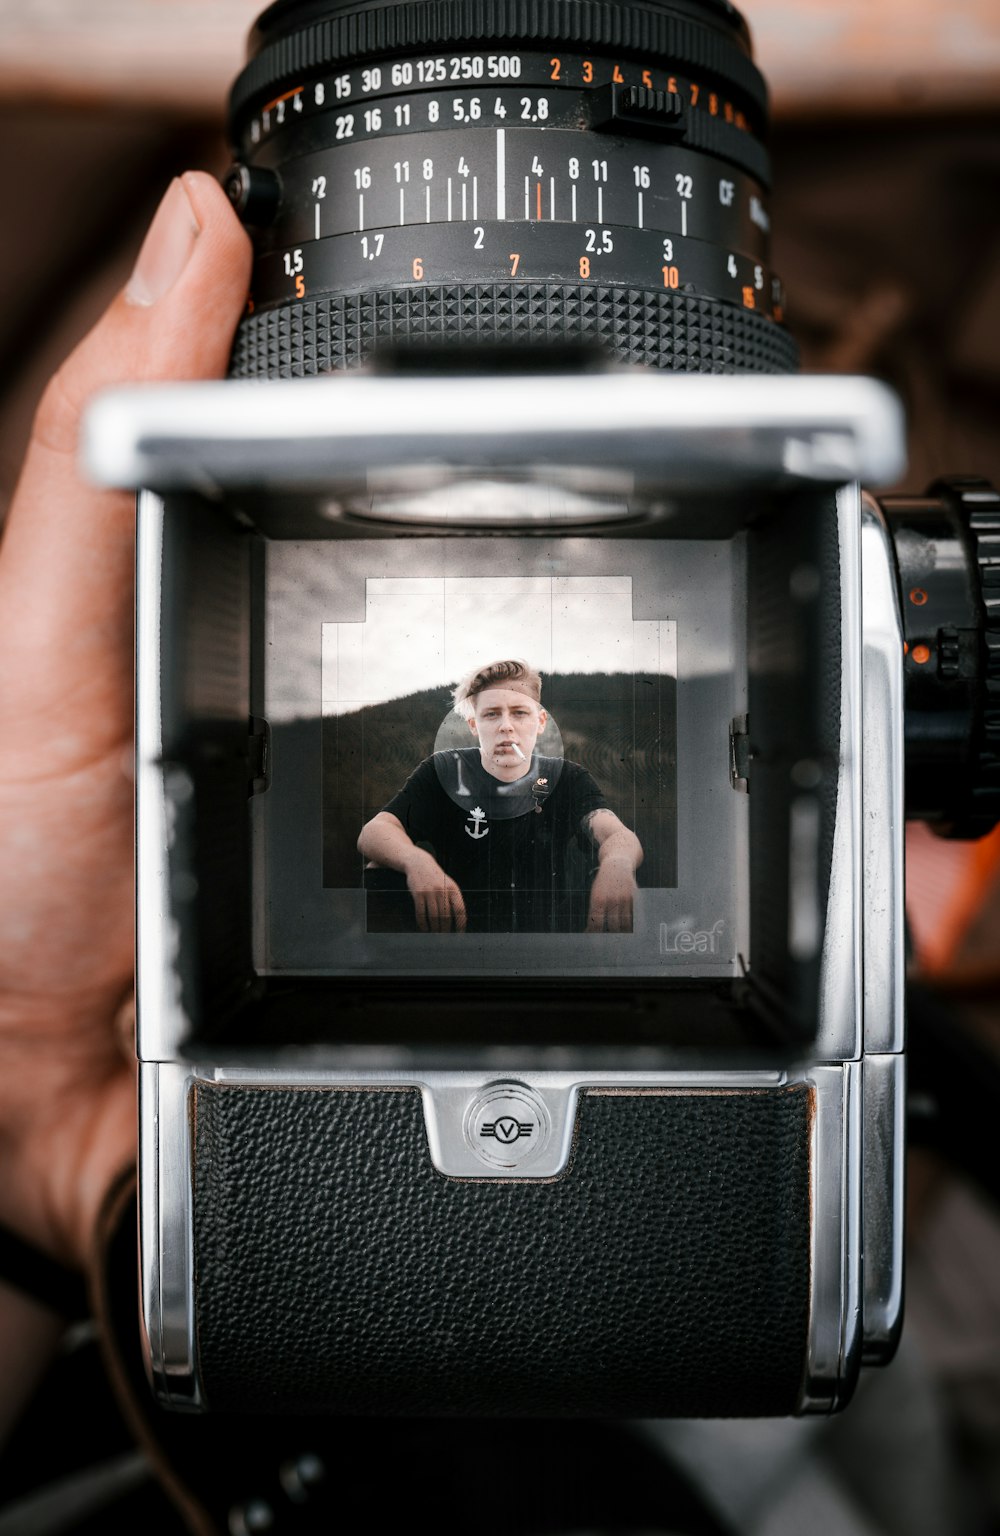 a person holding a camera with a picture of a man on it